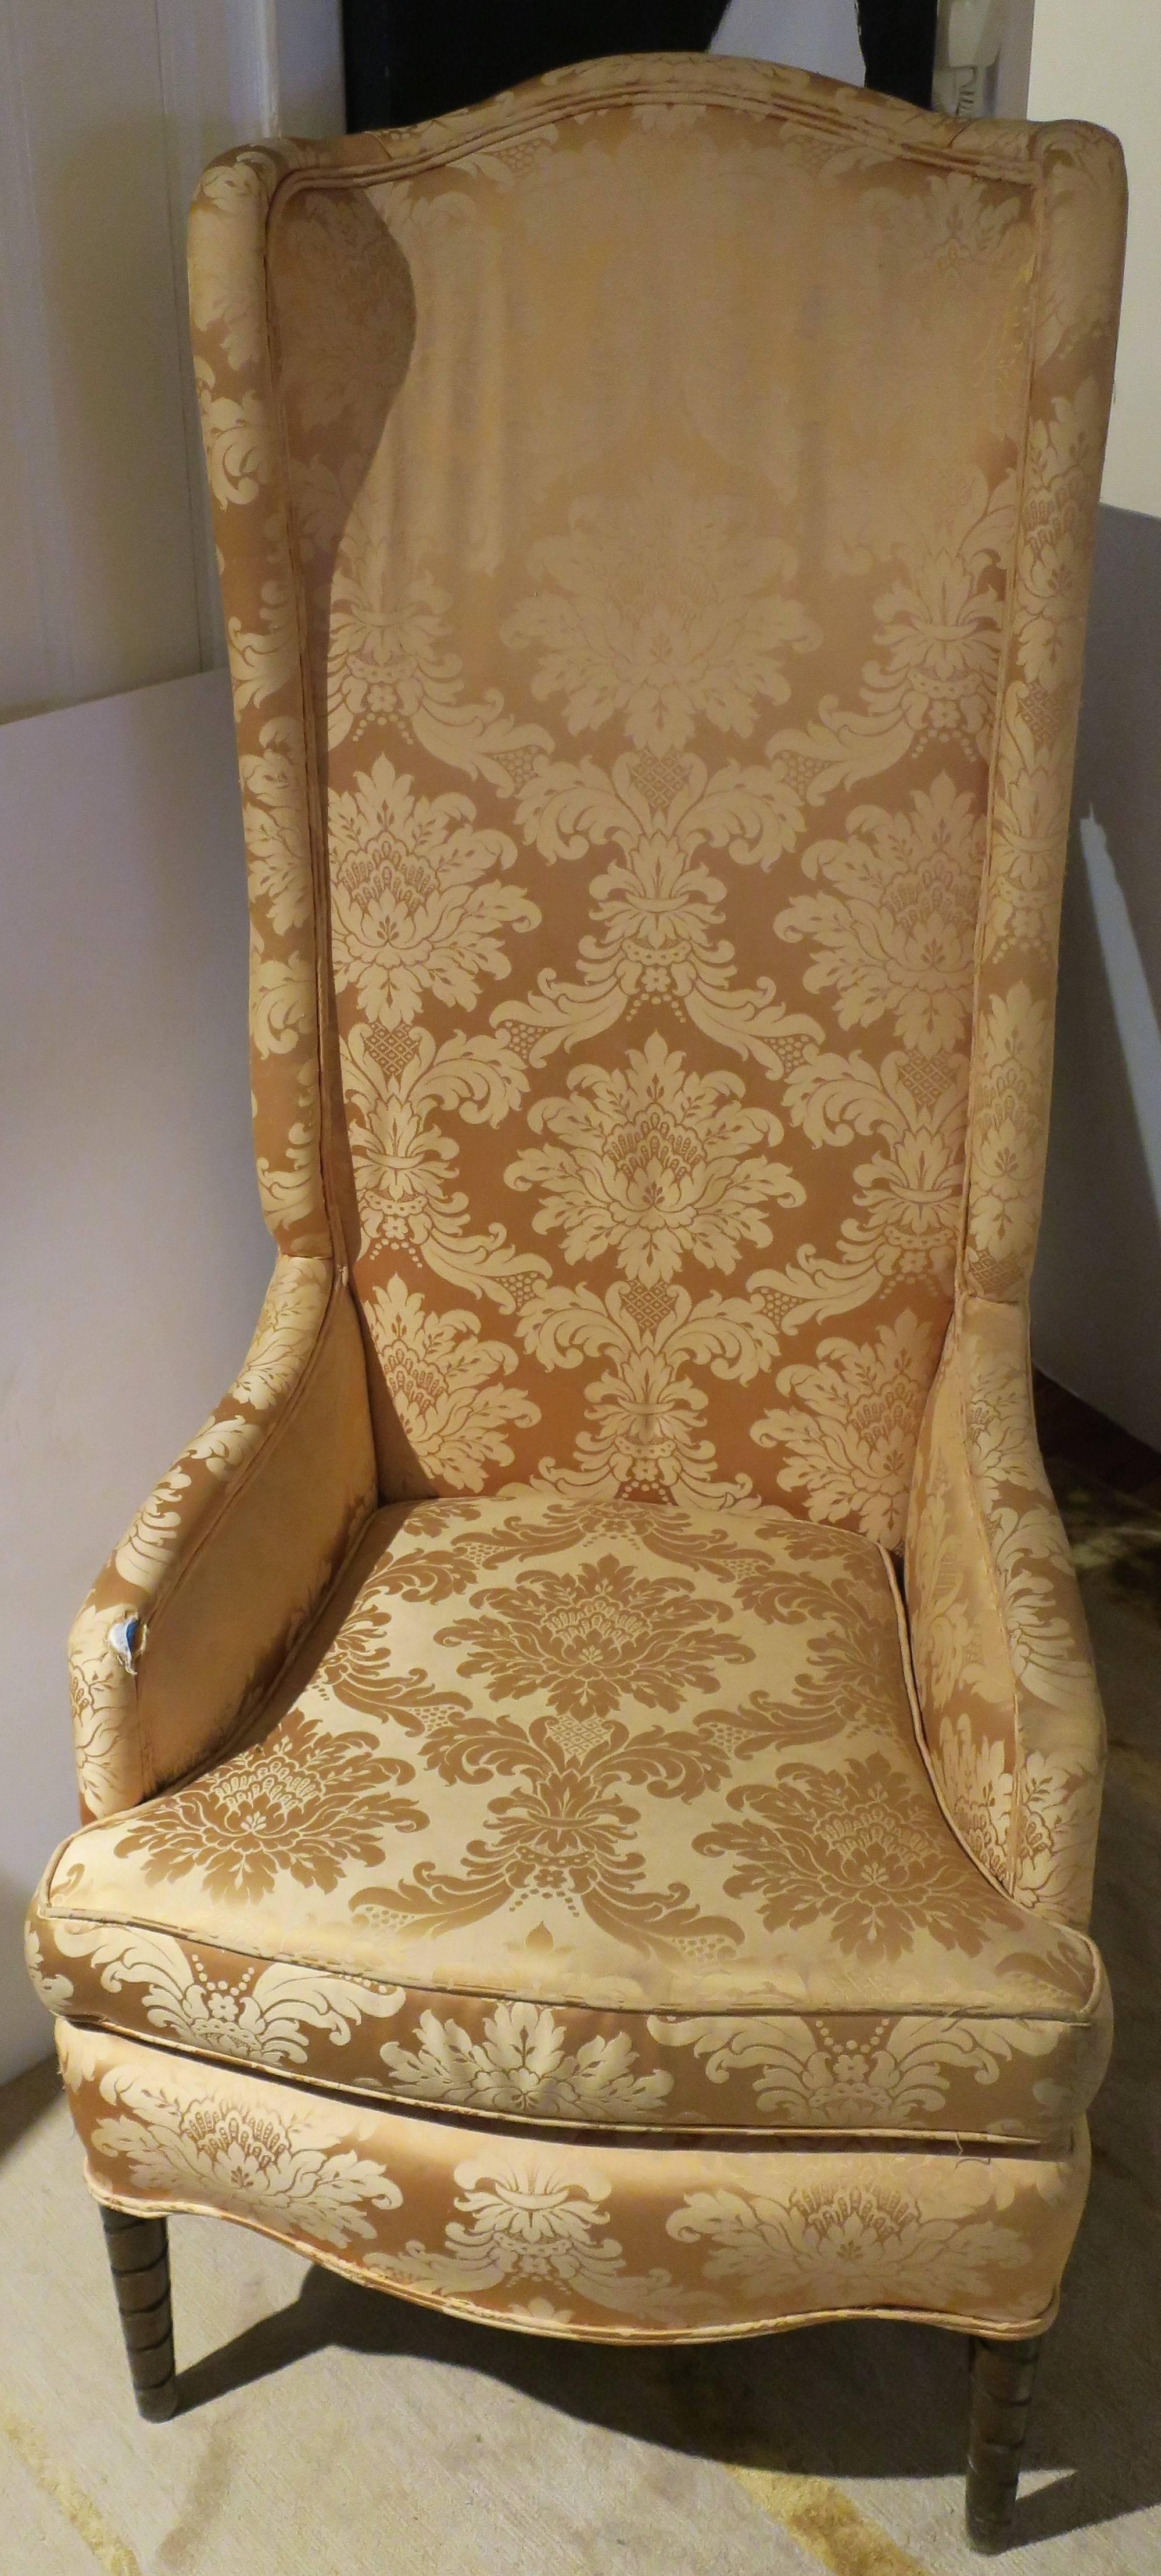 A well made mid-20th century tall back wingback upholstered chair in a yellow-gold damask fabric, circa 1960s. Measurements include: 56